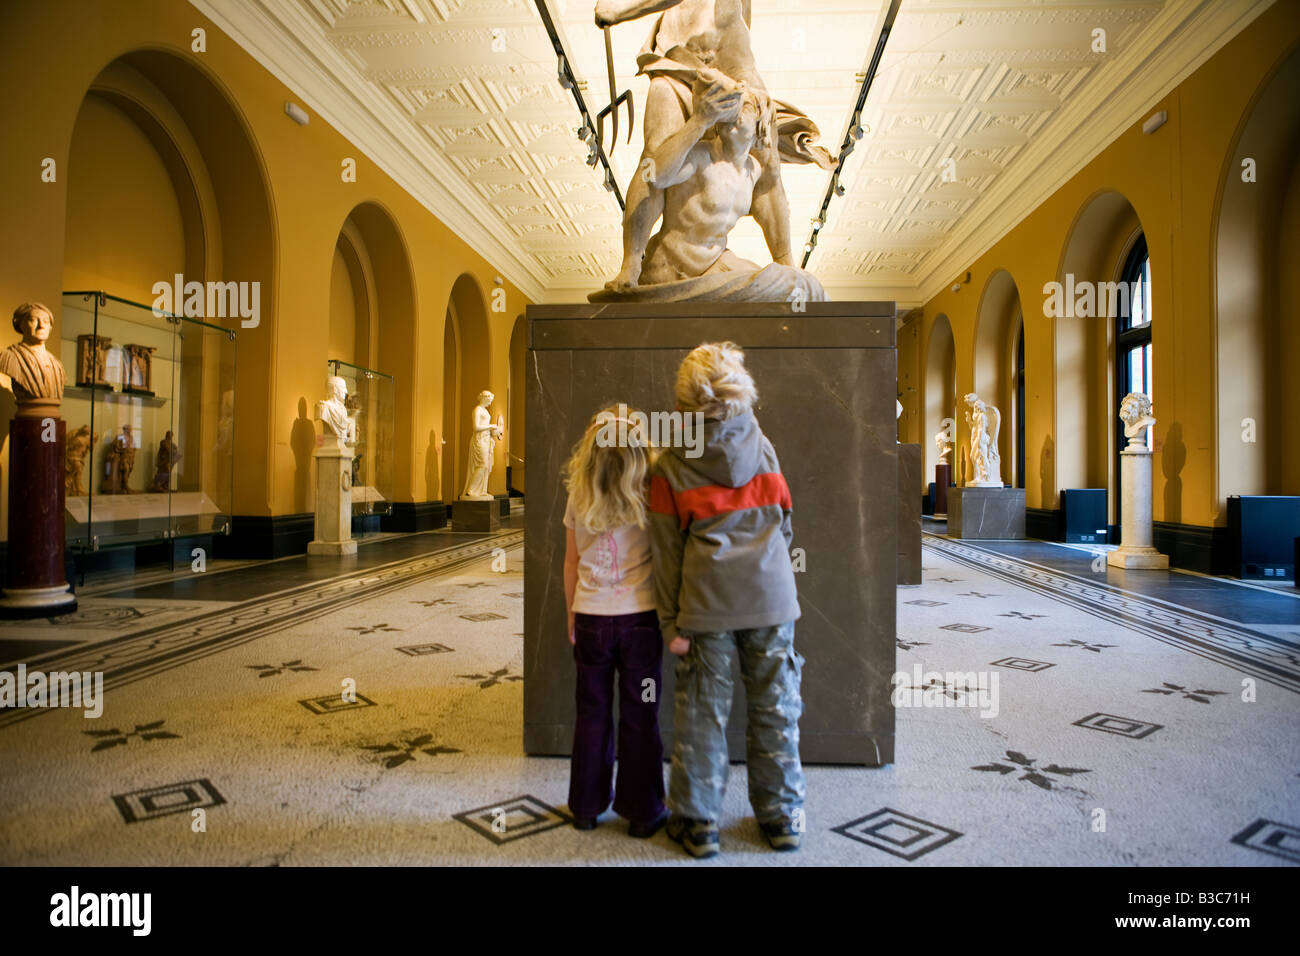 England, London, Victoria and Albert Museum. A brother and sister look up at a classically carved statue in the a viewing gallery of one of the world's most important visitor centres. (MR). Stock Photo